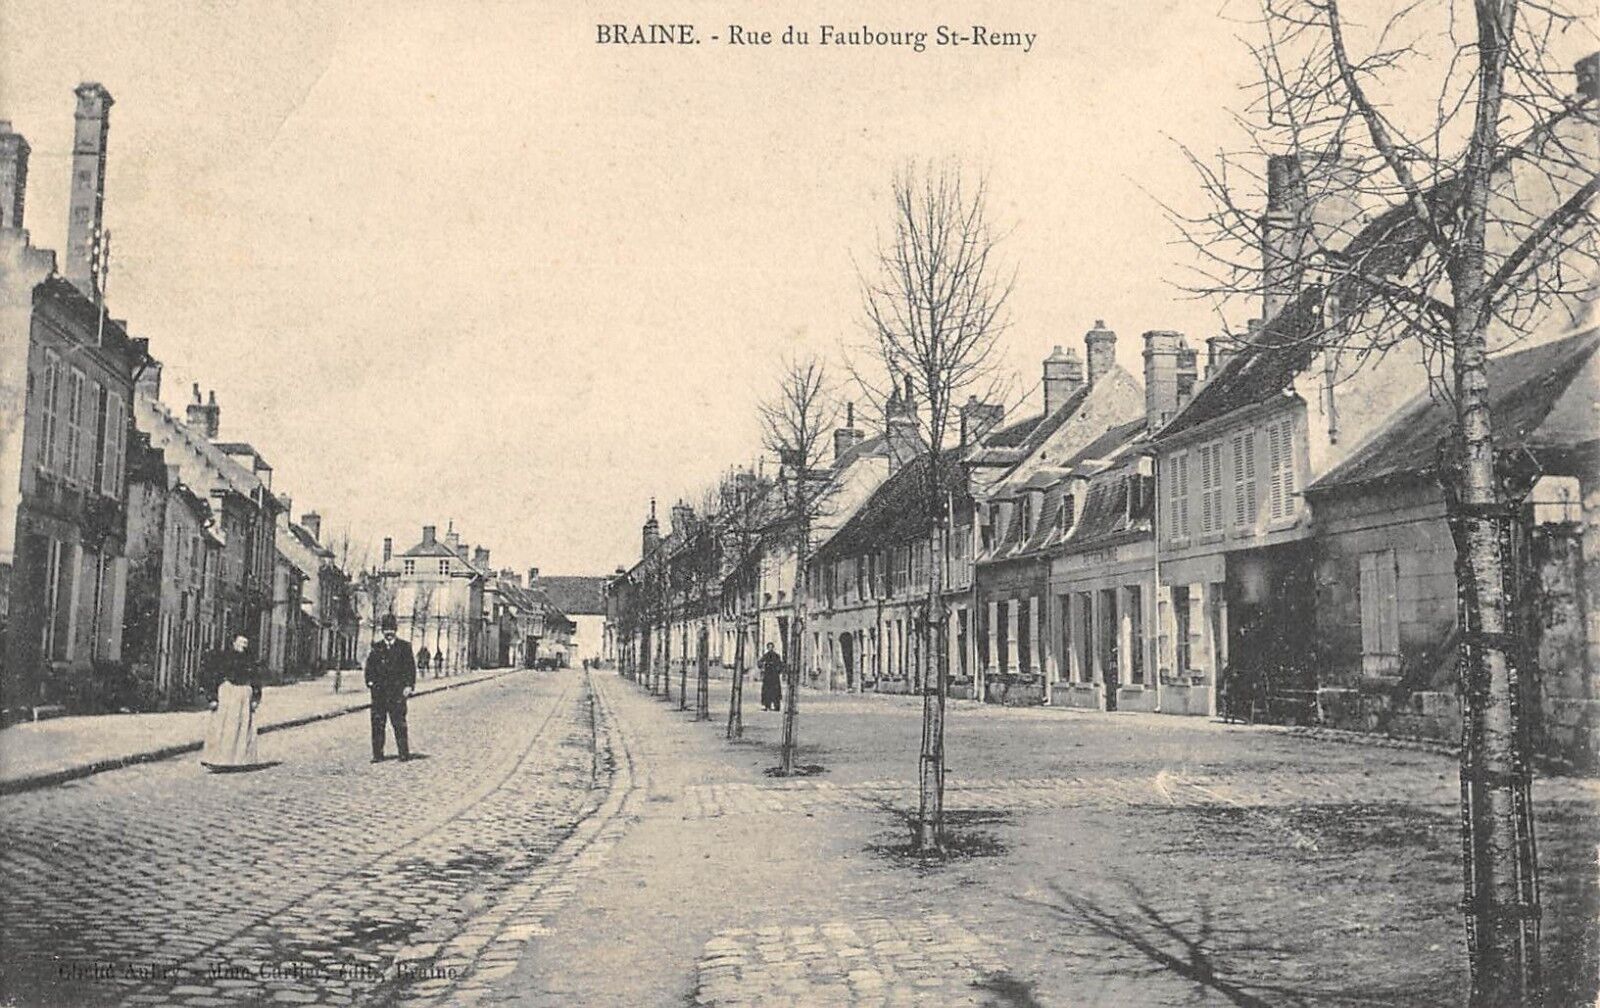 CPA 02 BRAINE RUE DU FAUBOURG ST REMY (animated cpa not common